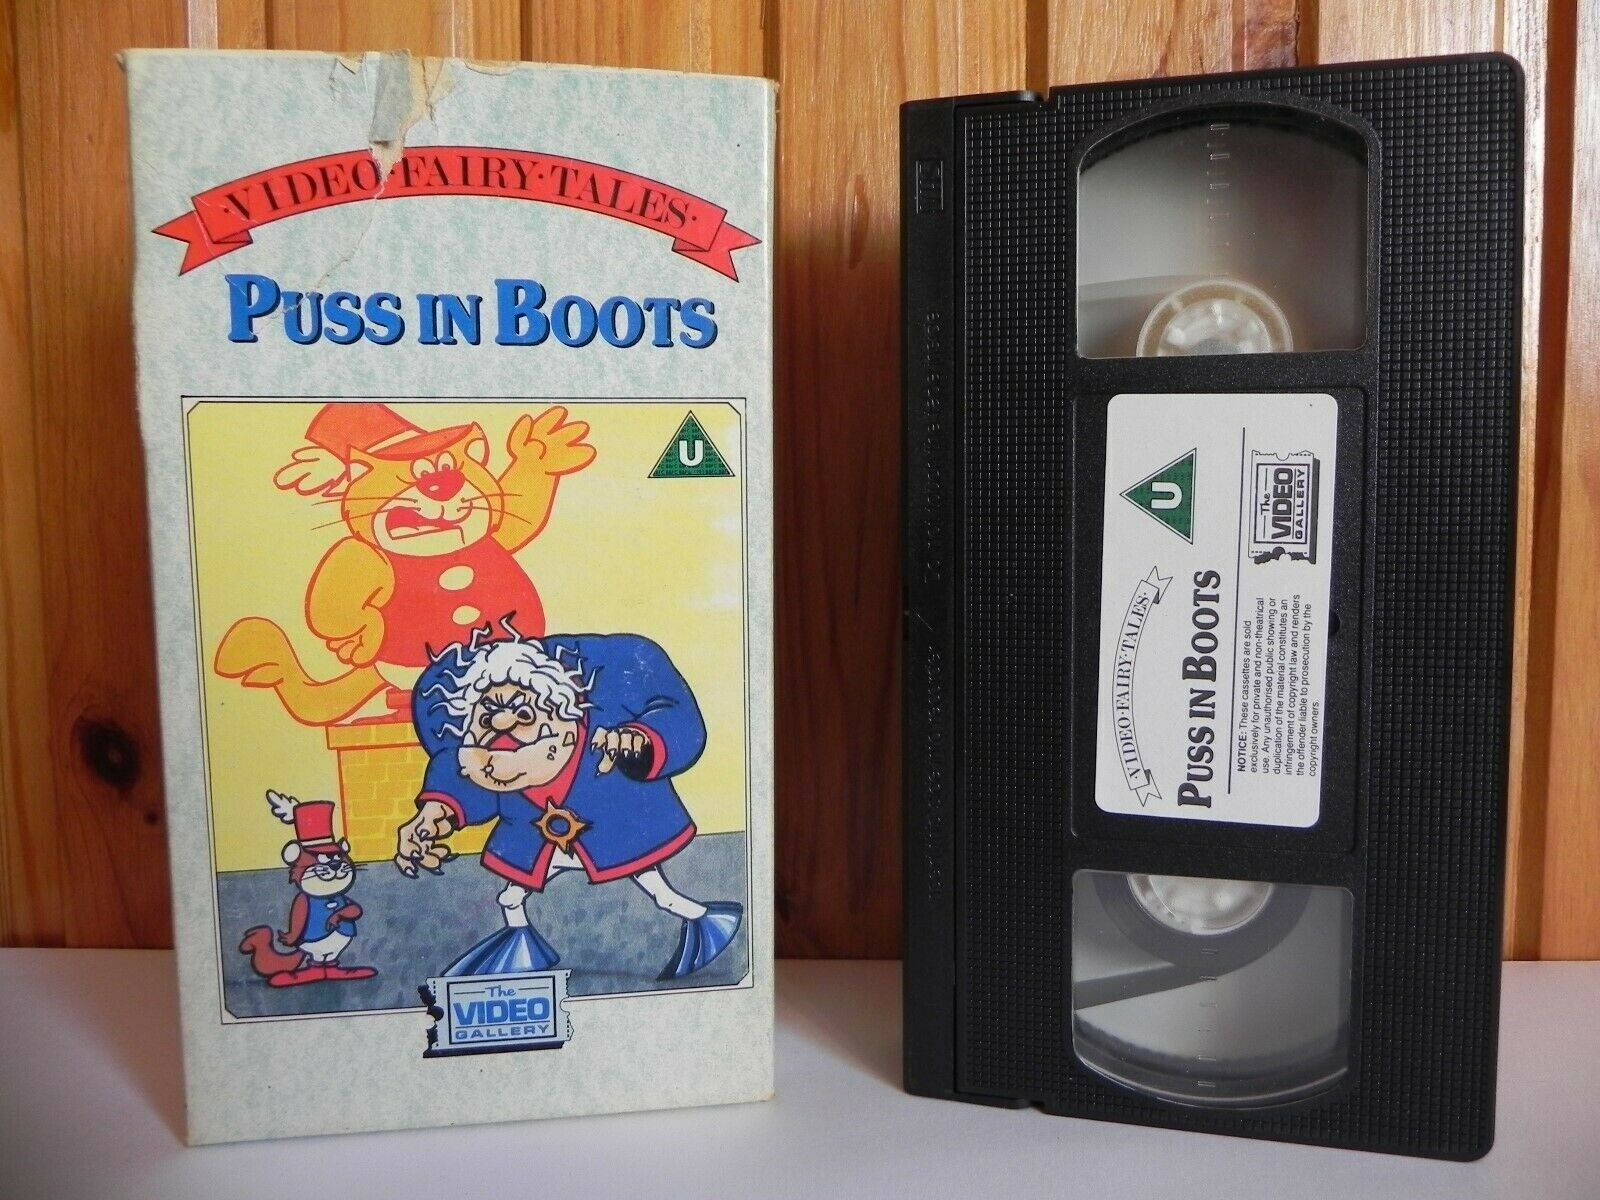 Puss In Boots - Fairytale - Animated - Adventures - Children's - Carton - VHS-